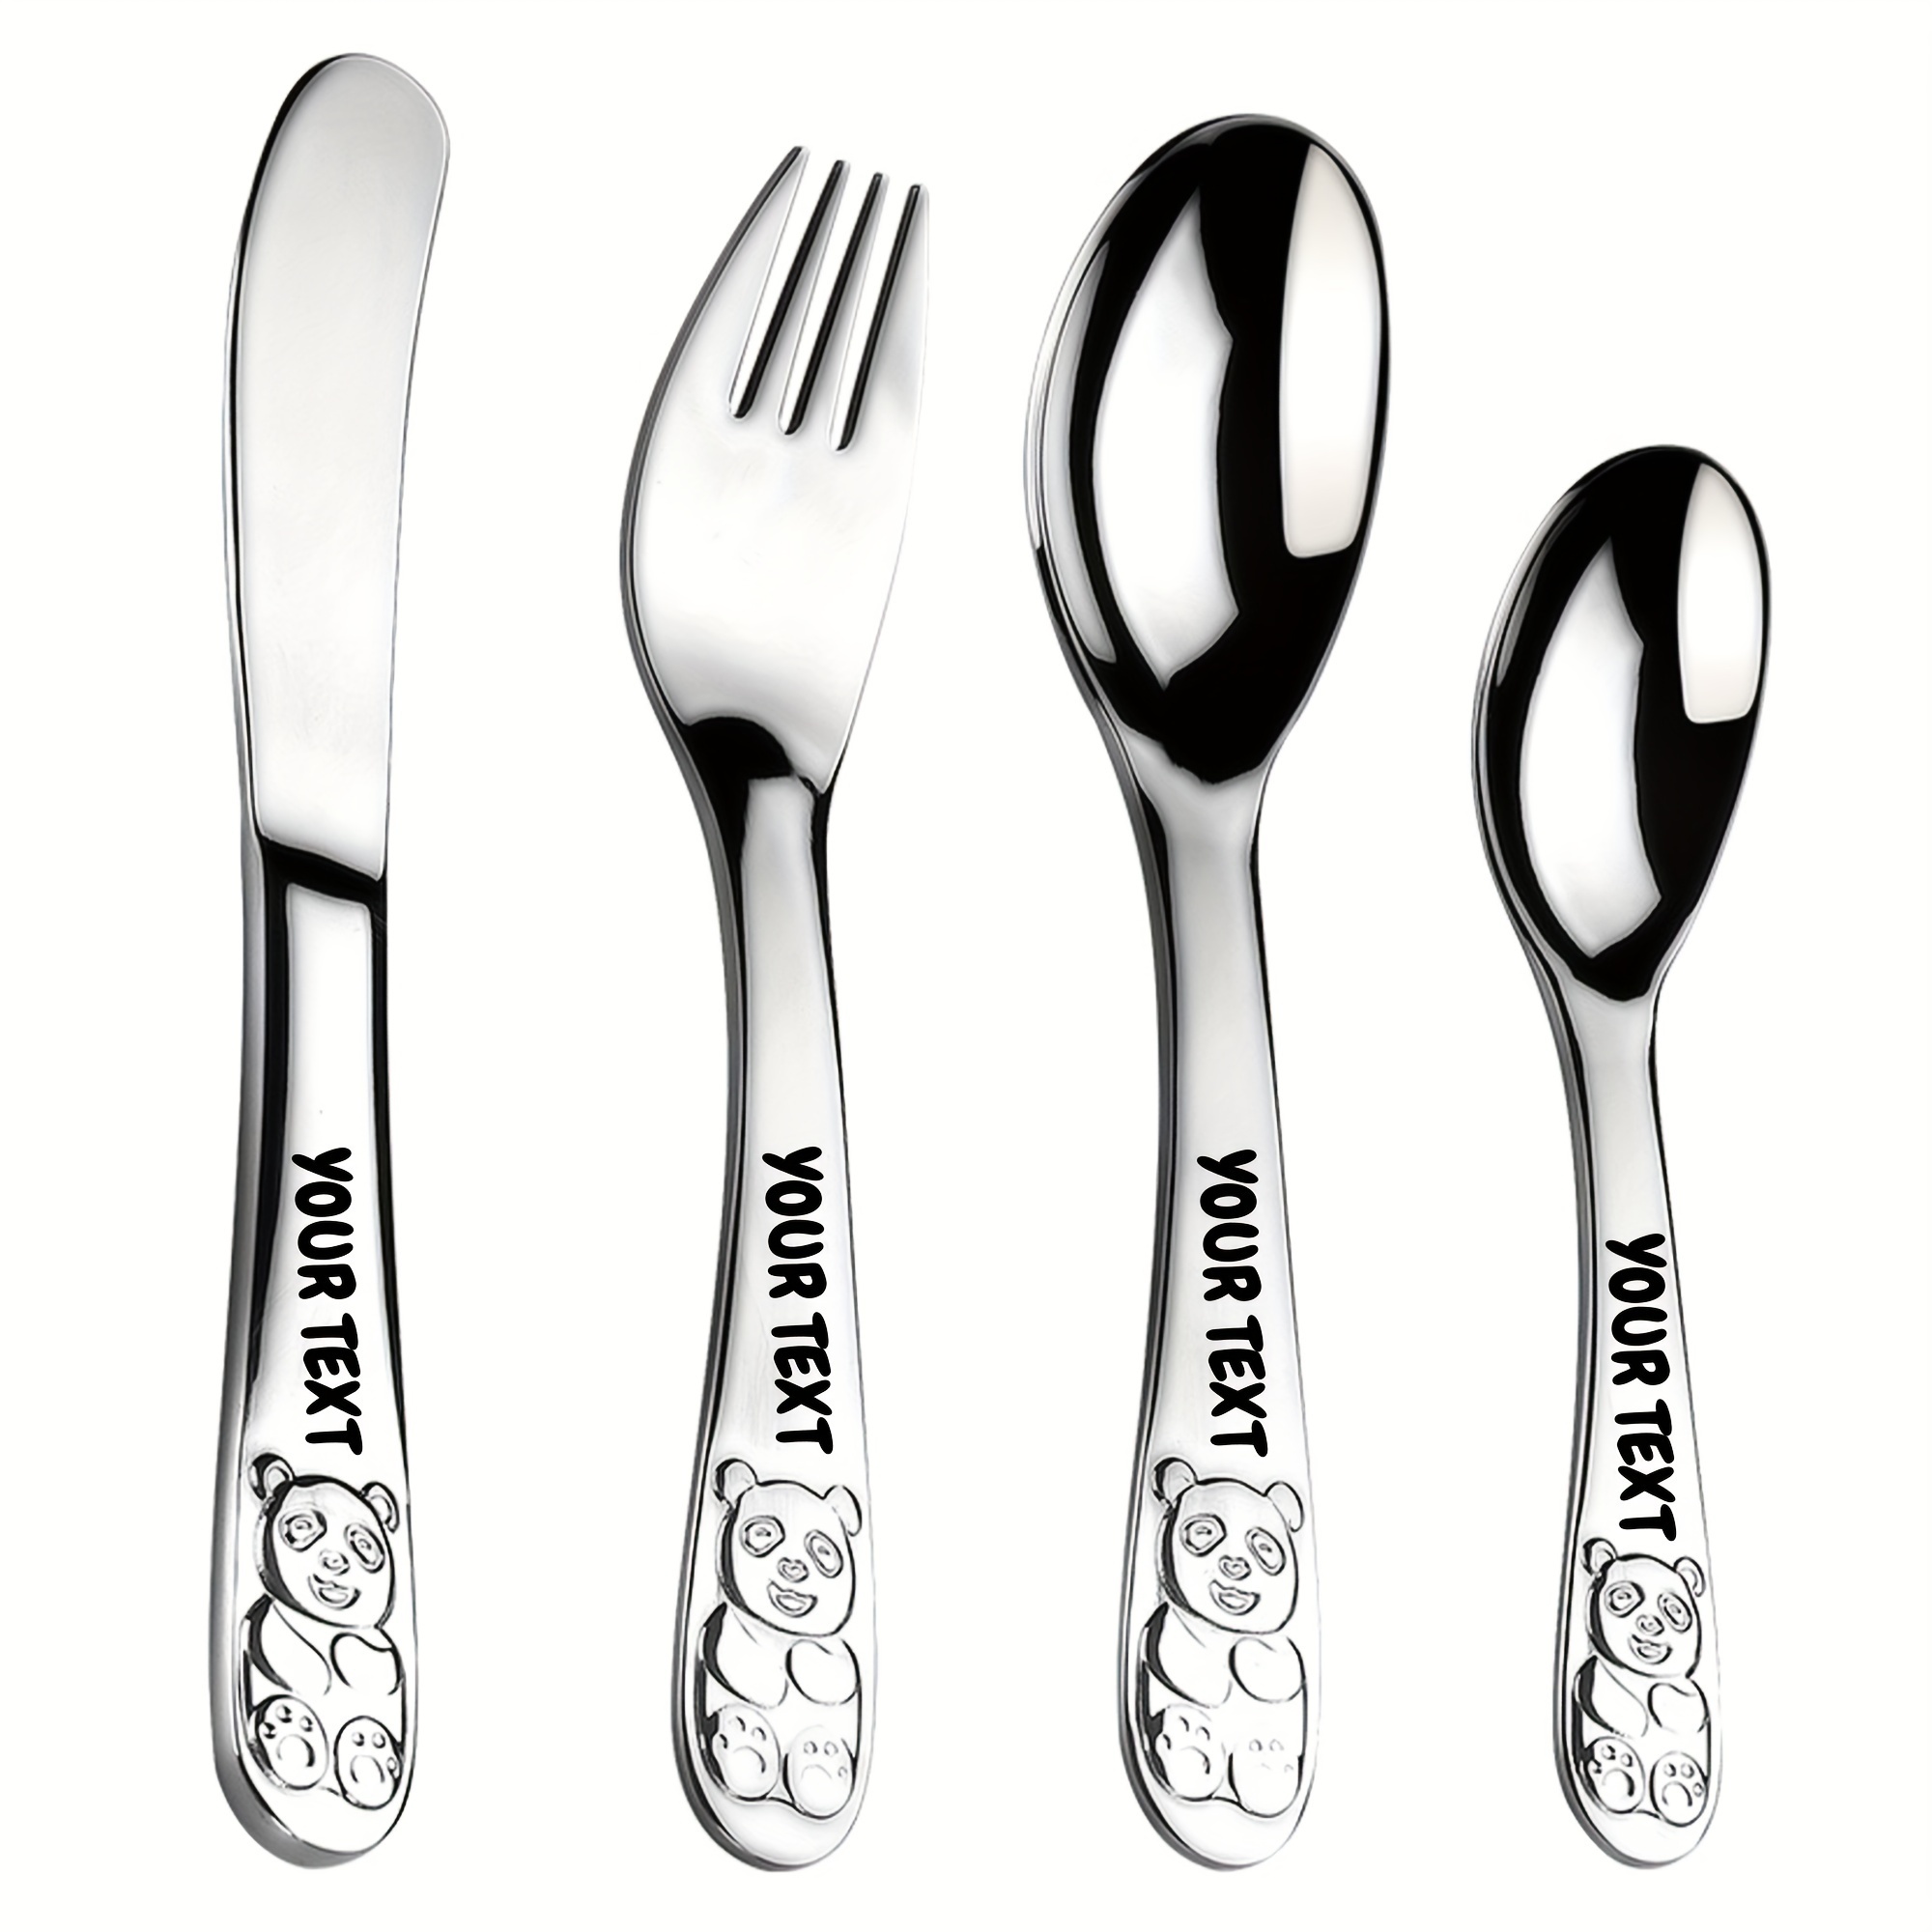 

Personalized Stainless Steel Cutlery Set, 4-piece Engraved Silverware With Custom Name, Universal Holiday Themed Flatware With Playful Panda Design - Ideal For Gifting And Special Occasions